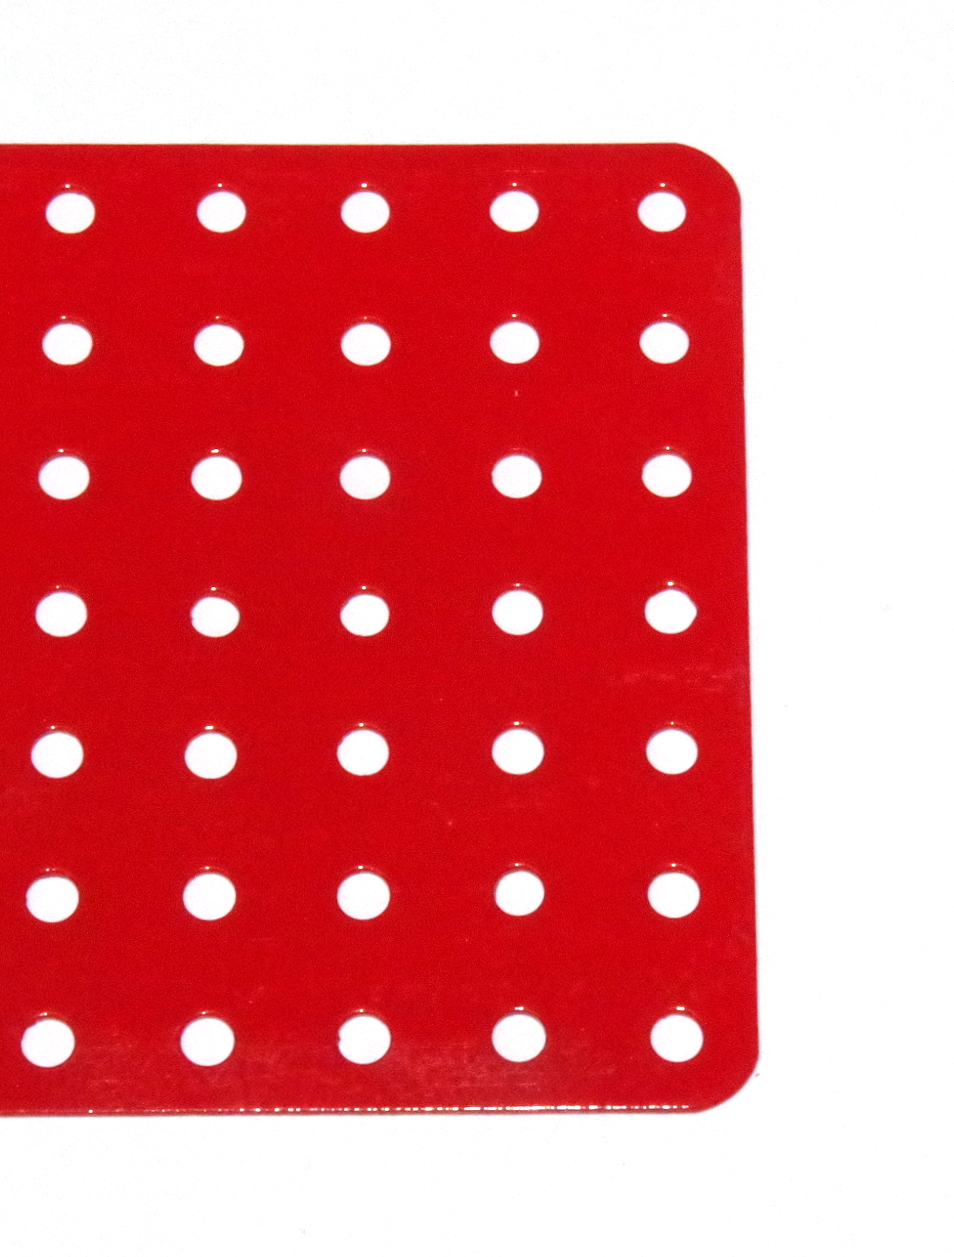 52c Flat Plate 7x19 Hole Red